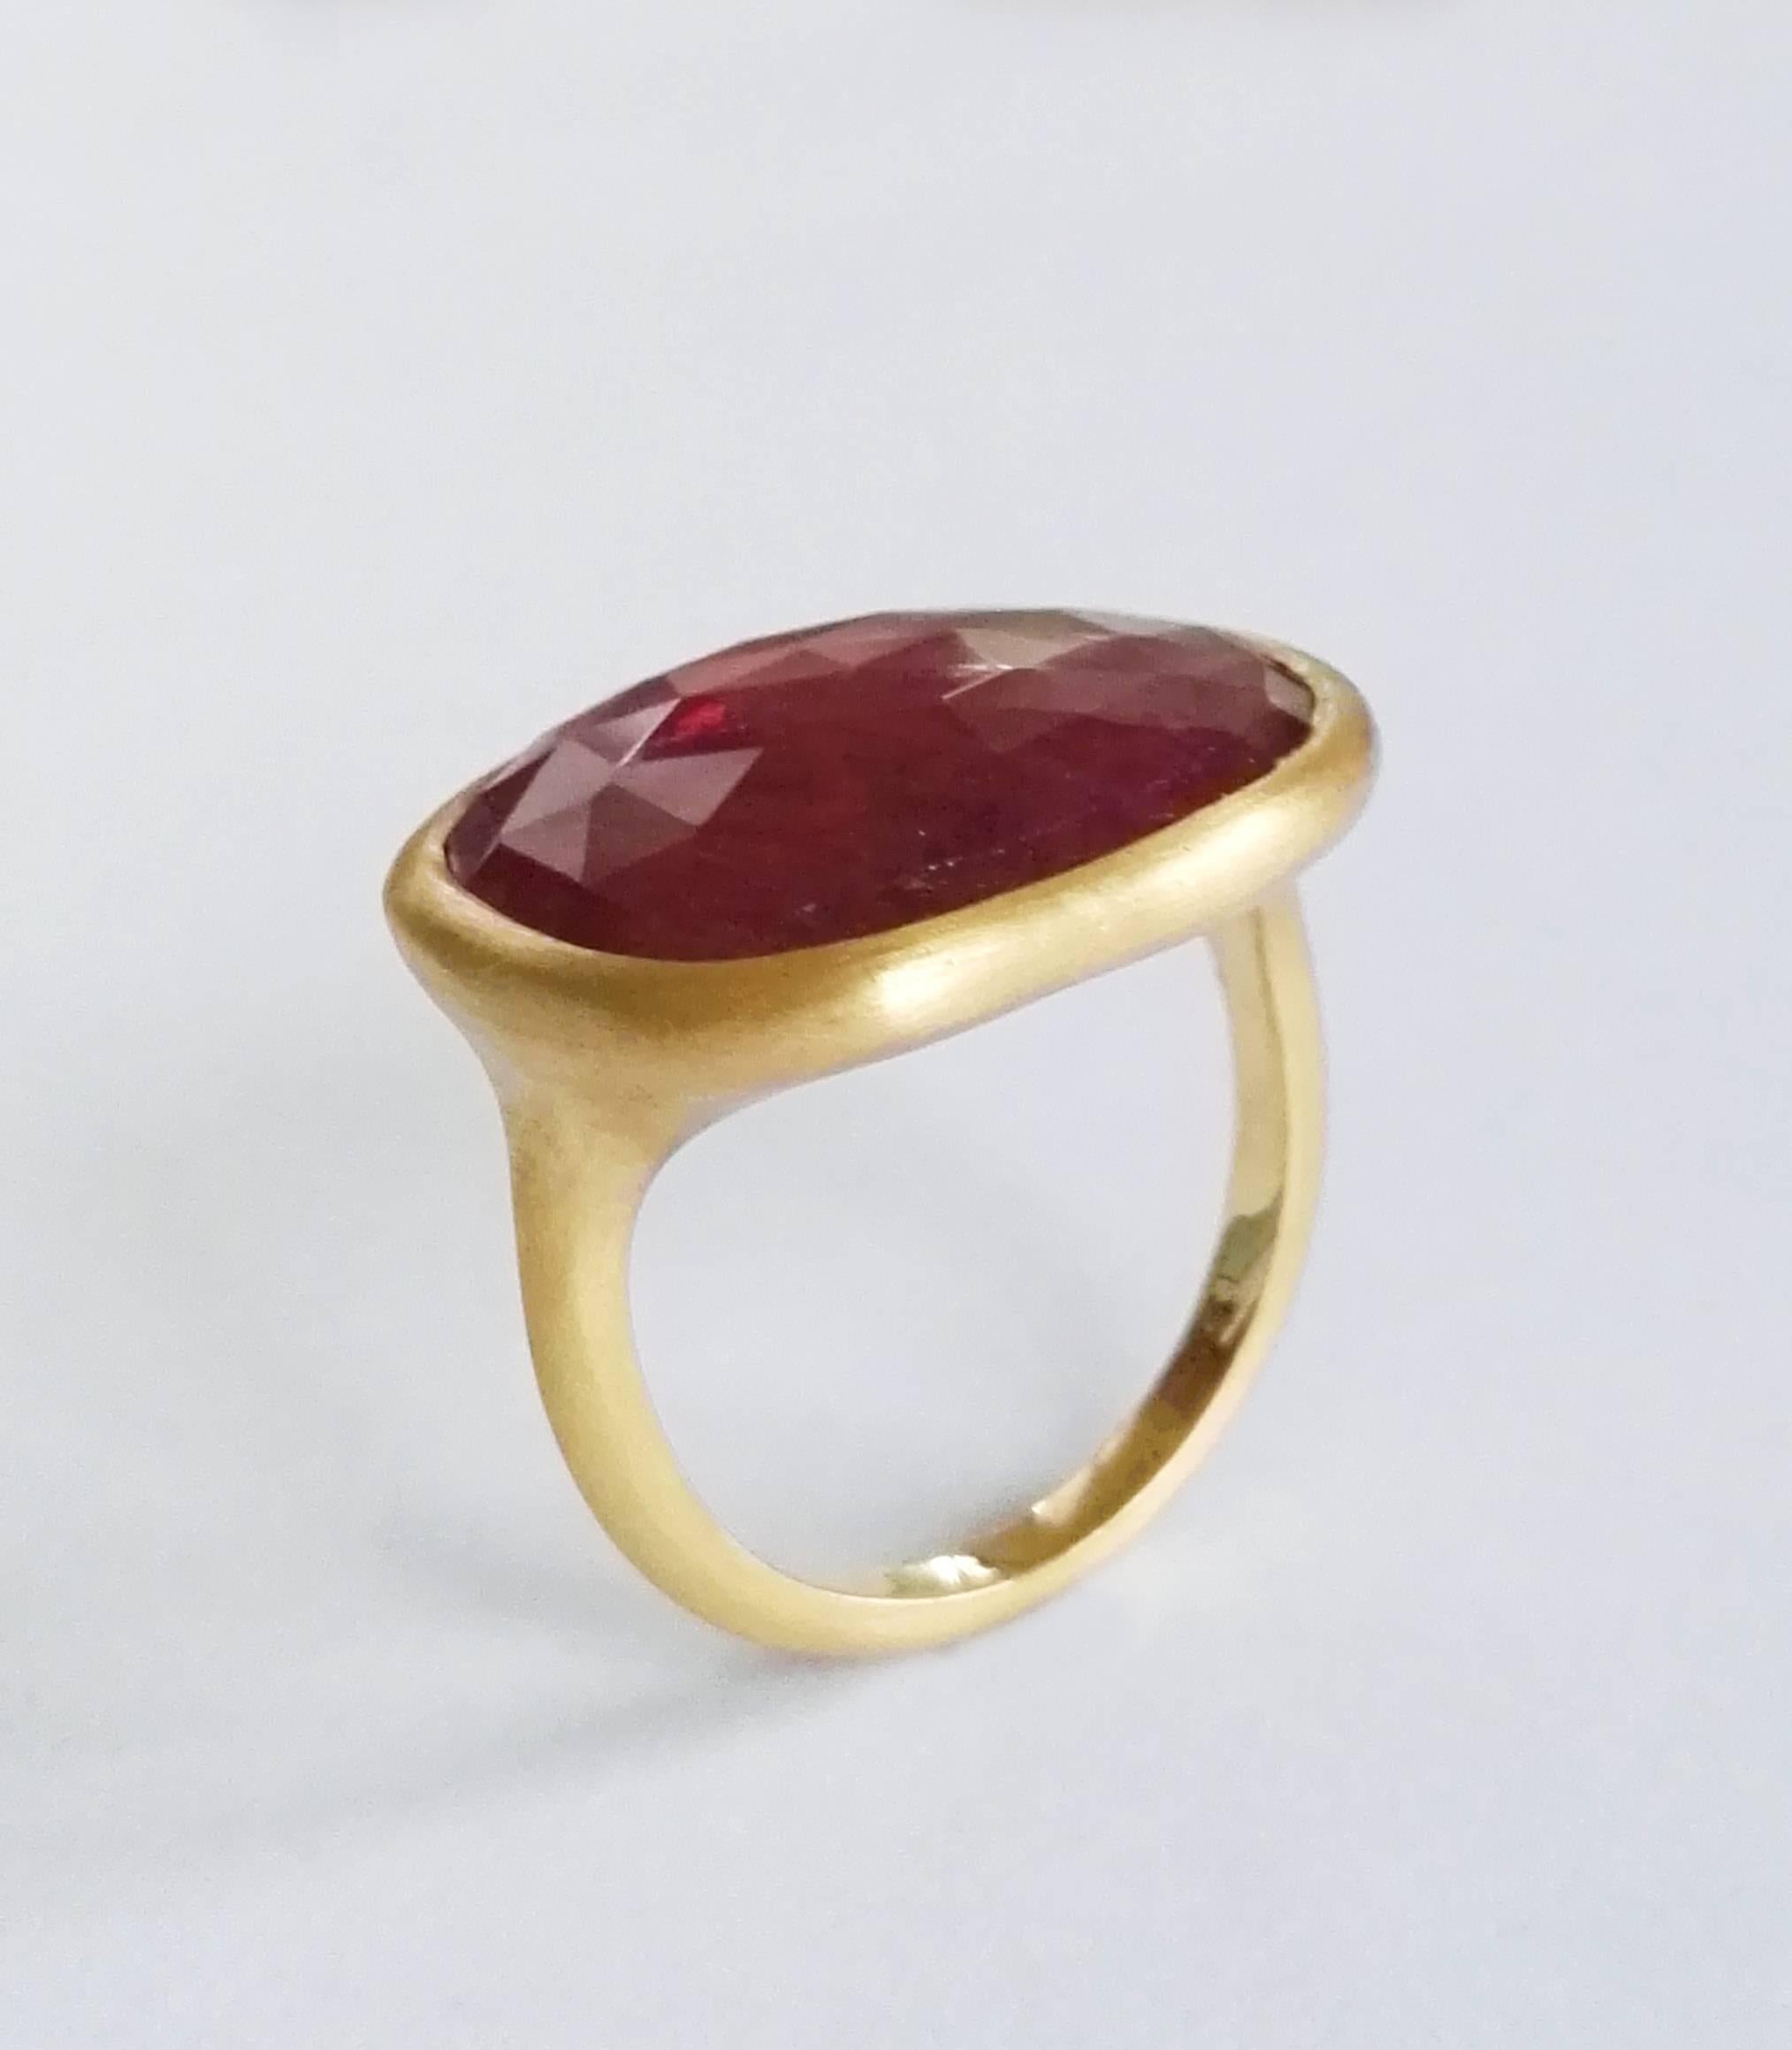 Dalben design one of a kind 18k yellow gold satin finishing ring with a 11,98 carat  bezel-set faceted treated red sapphire.
Bezel stone dimensions :
width 0,84 inch (21,40 mm)
height 0,76 inch (19,20 mm)
size 7 1/4 USA - 55 EU re-sizable to most